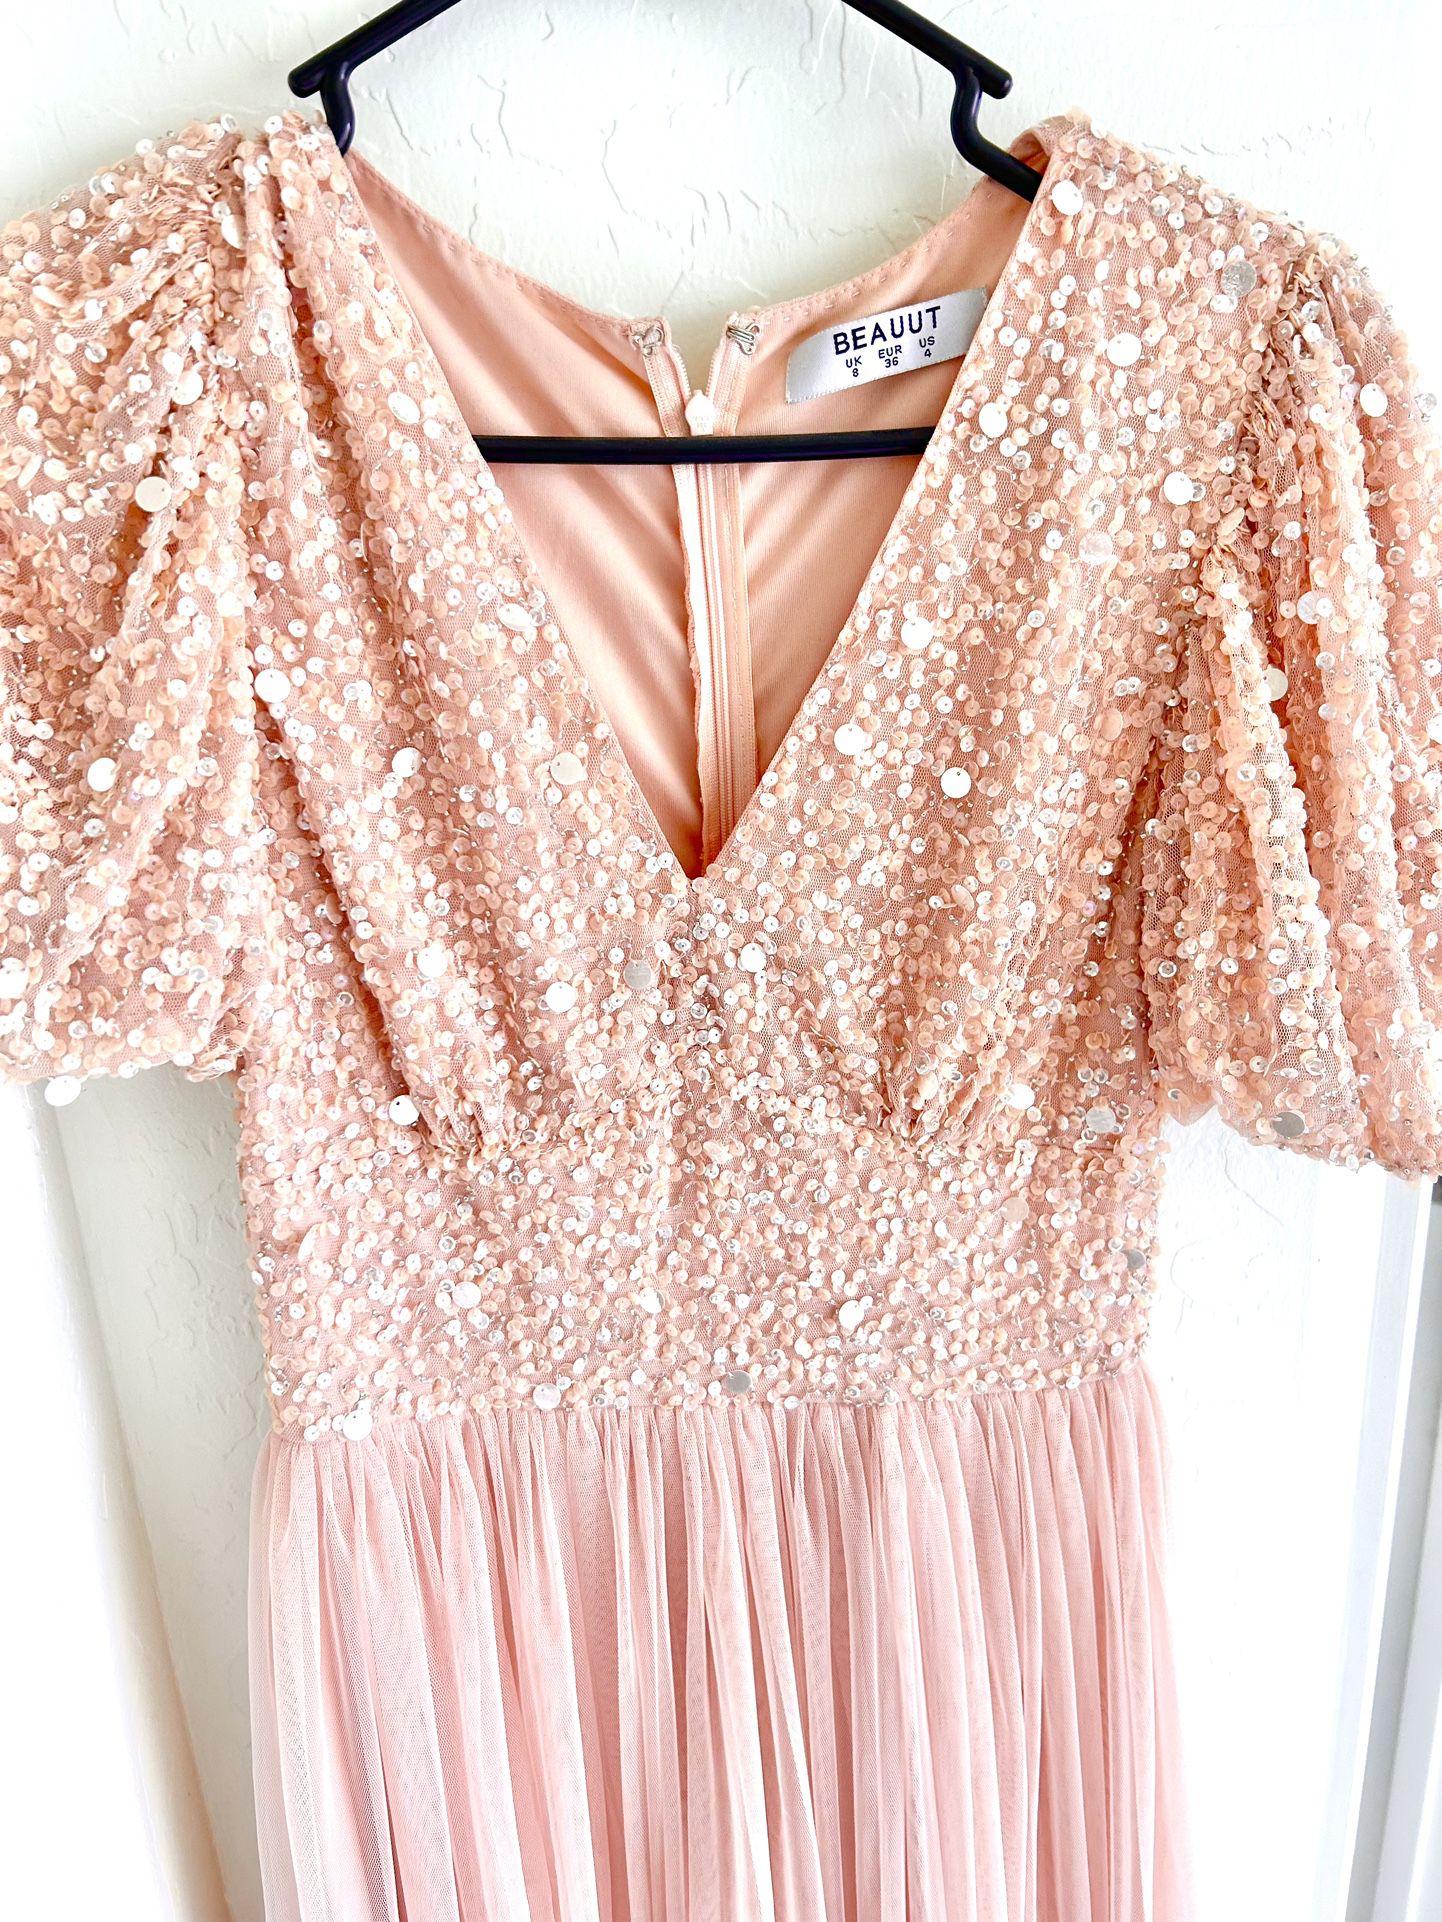 Beauut Bridesmaid sequin embellished maxi dress with tulle skirt in Blush pink